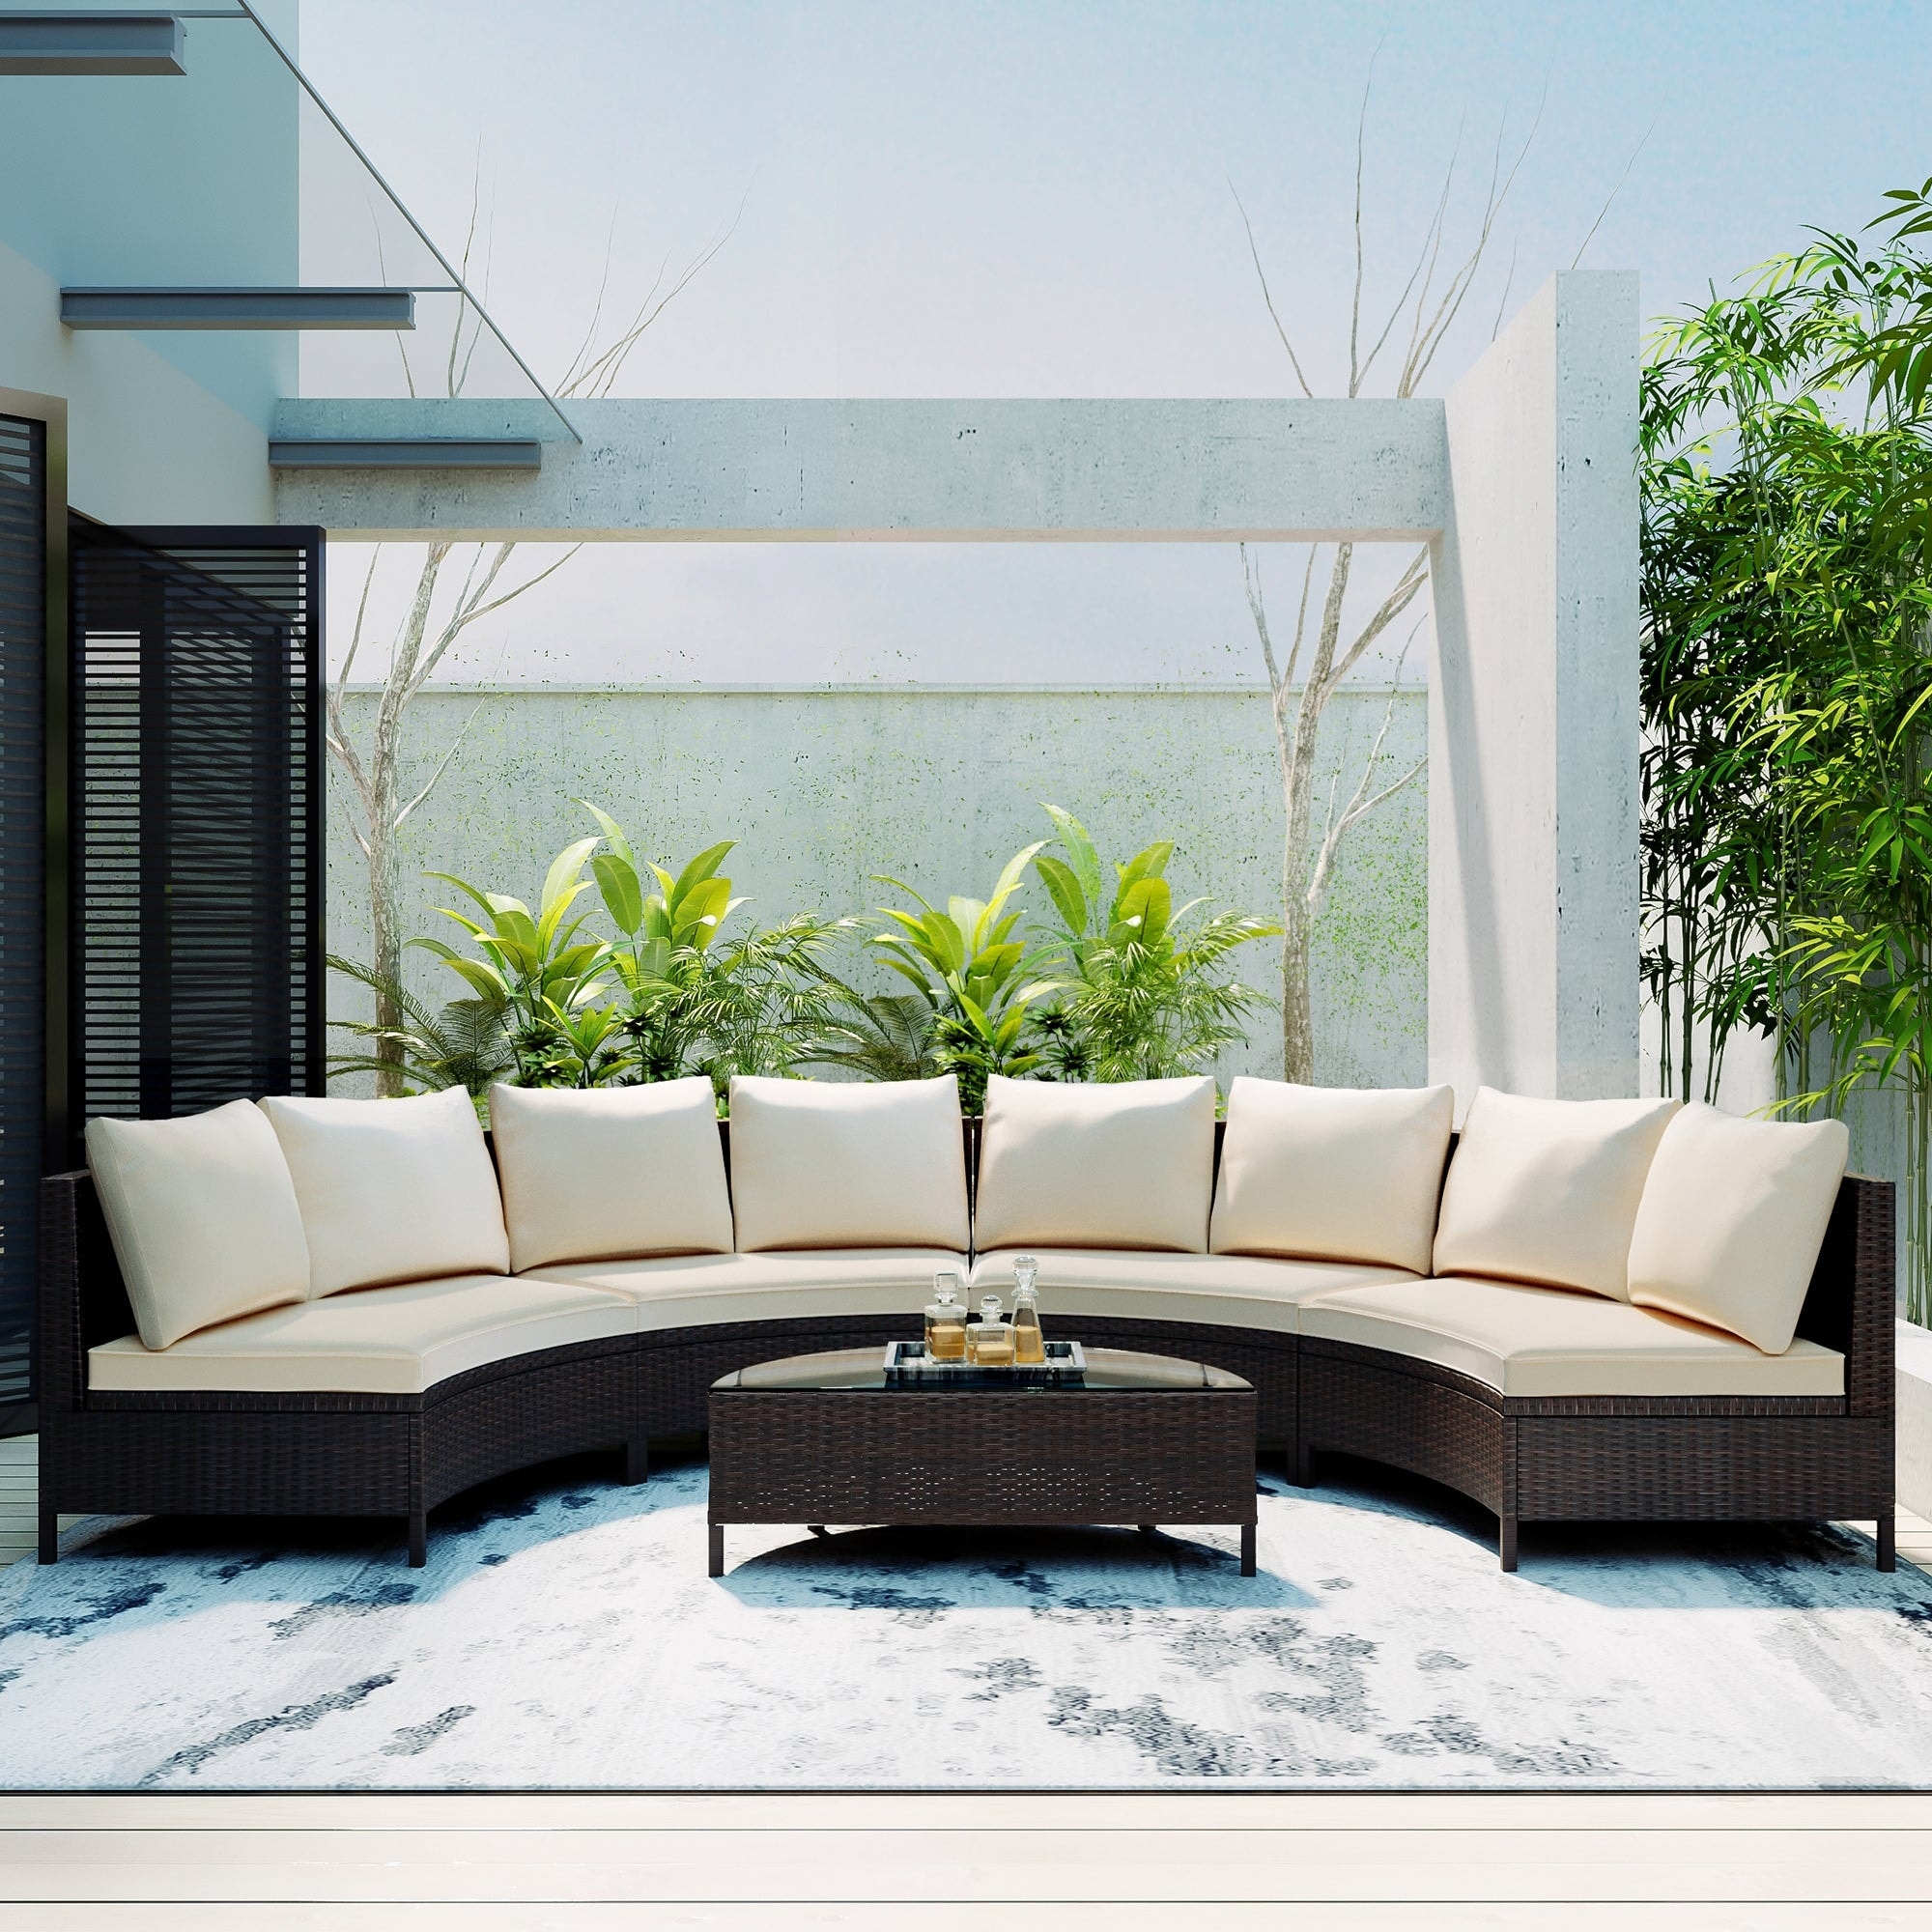 5 Pieces Outdoor Rattan Patio Sectional Sofa Set With Half-moon Glass Table